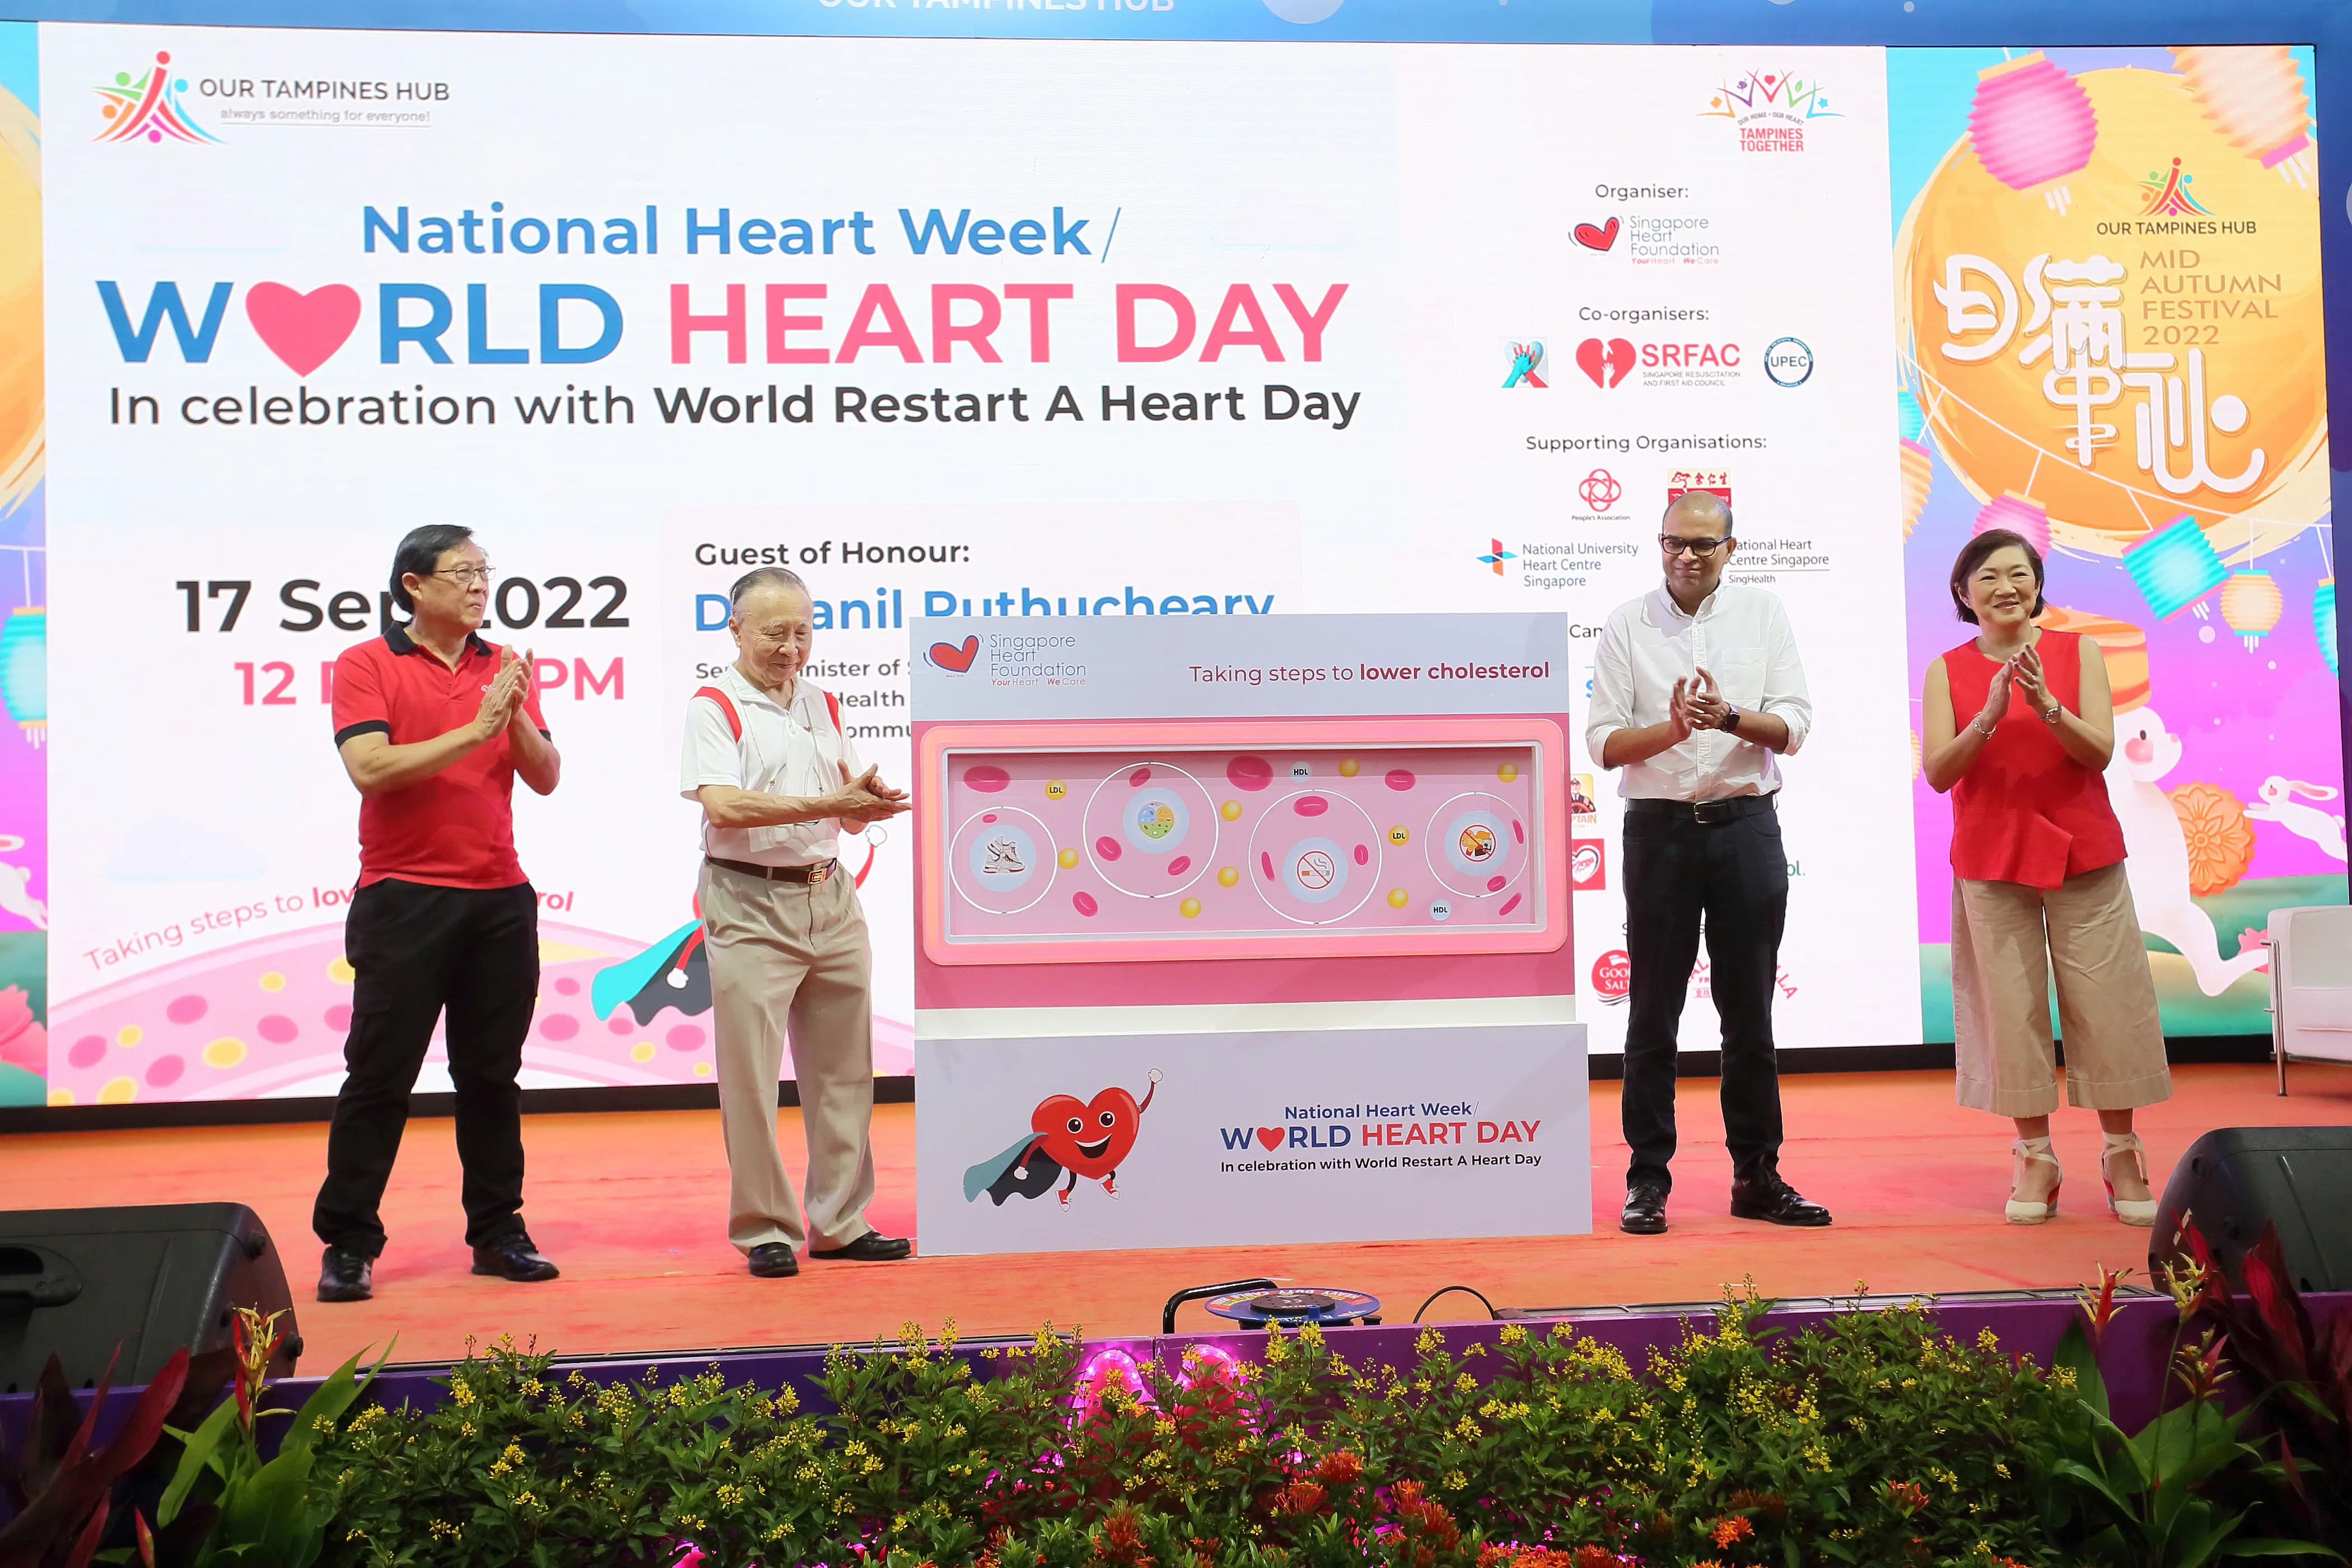 National Heart Week/World Heart Day 2022 story image